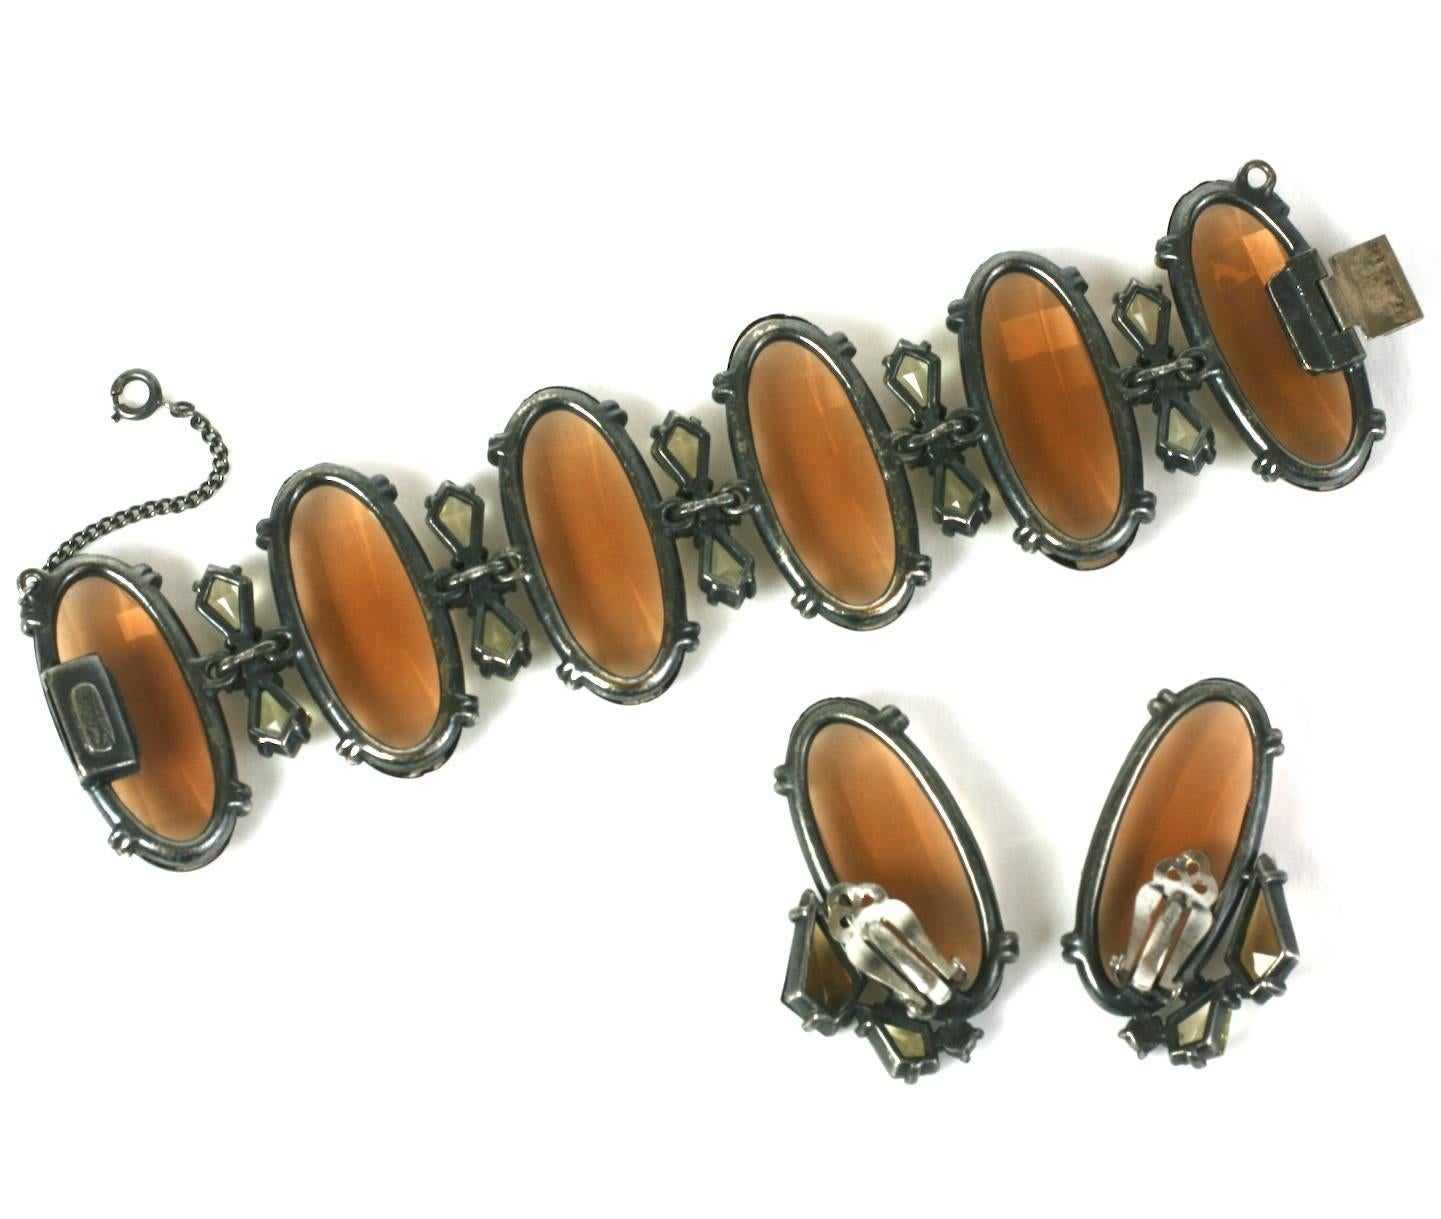 Elsa Schiaparelli's massive bracelet and ear clips of large smokey topaz top facet crystals with citrine and Aurora Swarovski crystal spacers. Extremely striking combination of colors and scale, set into antique silvered metal. 1950's USA,